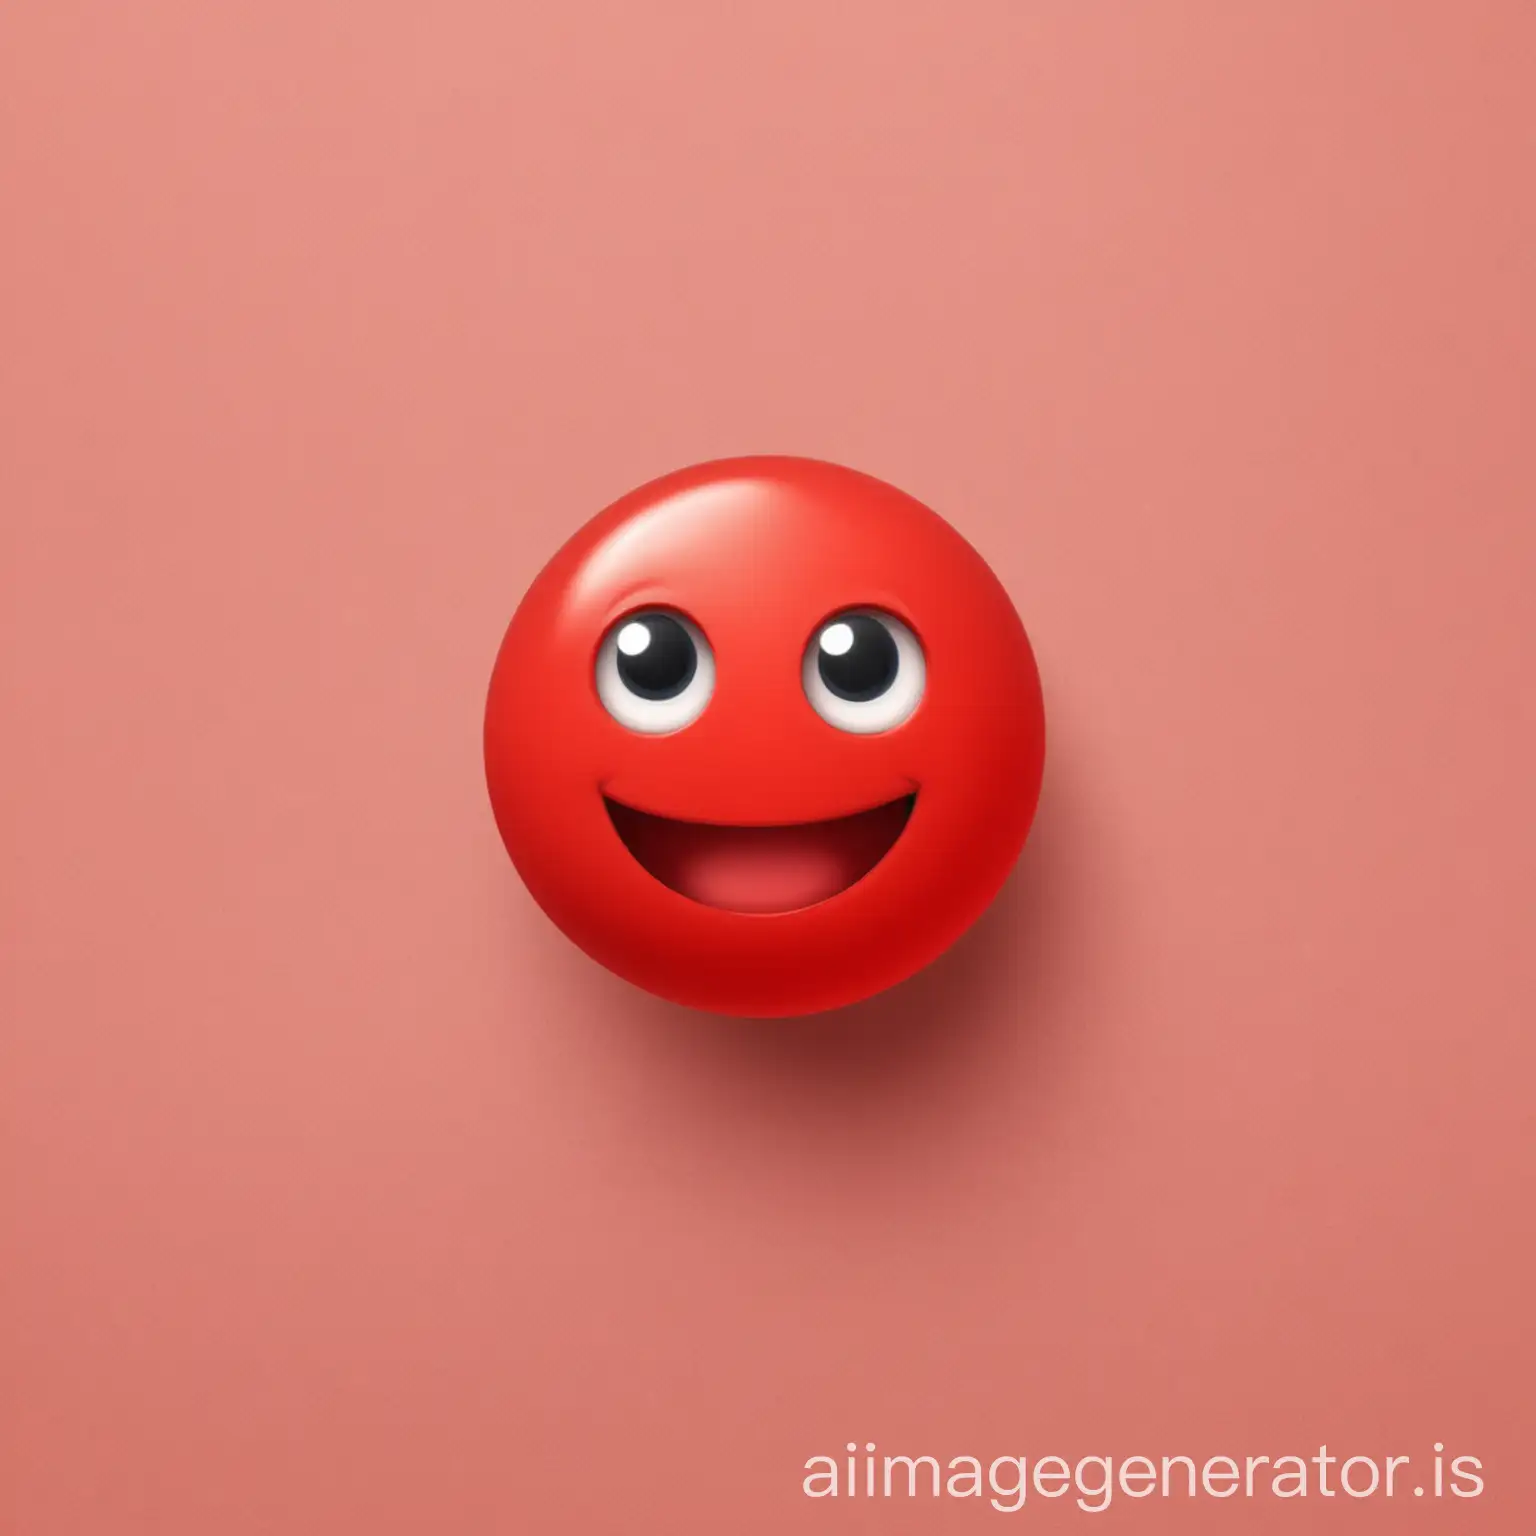 Red-Emoji-Greeting-with-Vibrant-Background